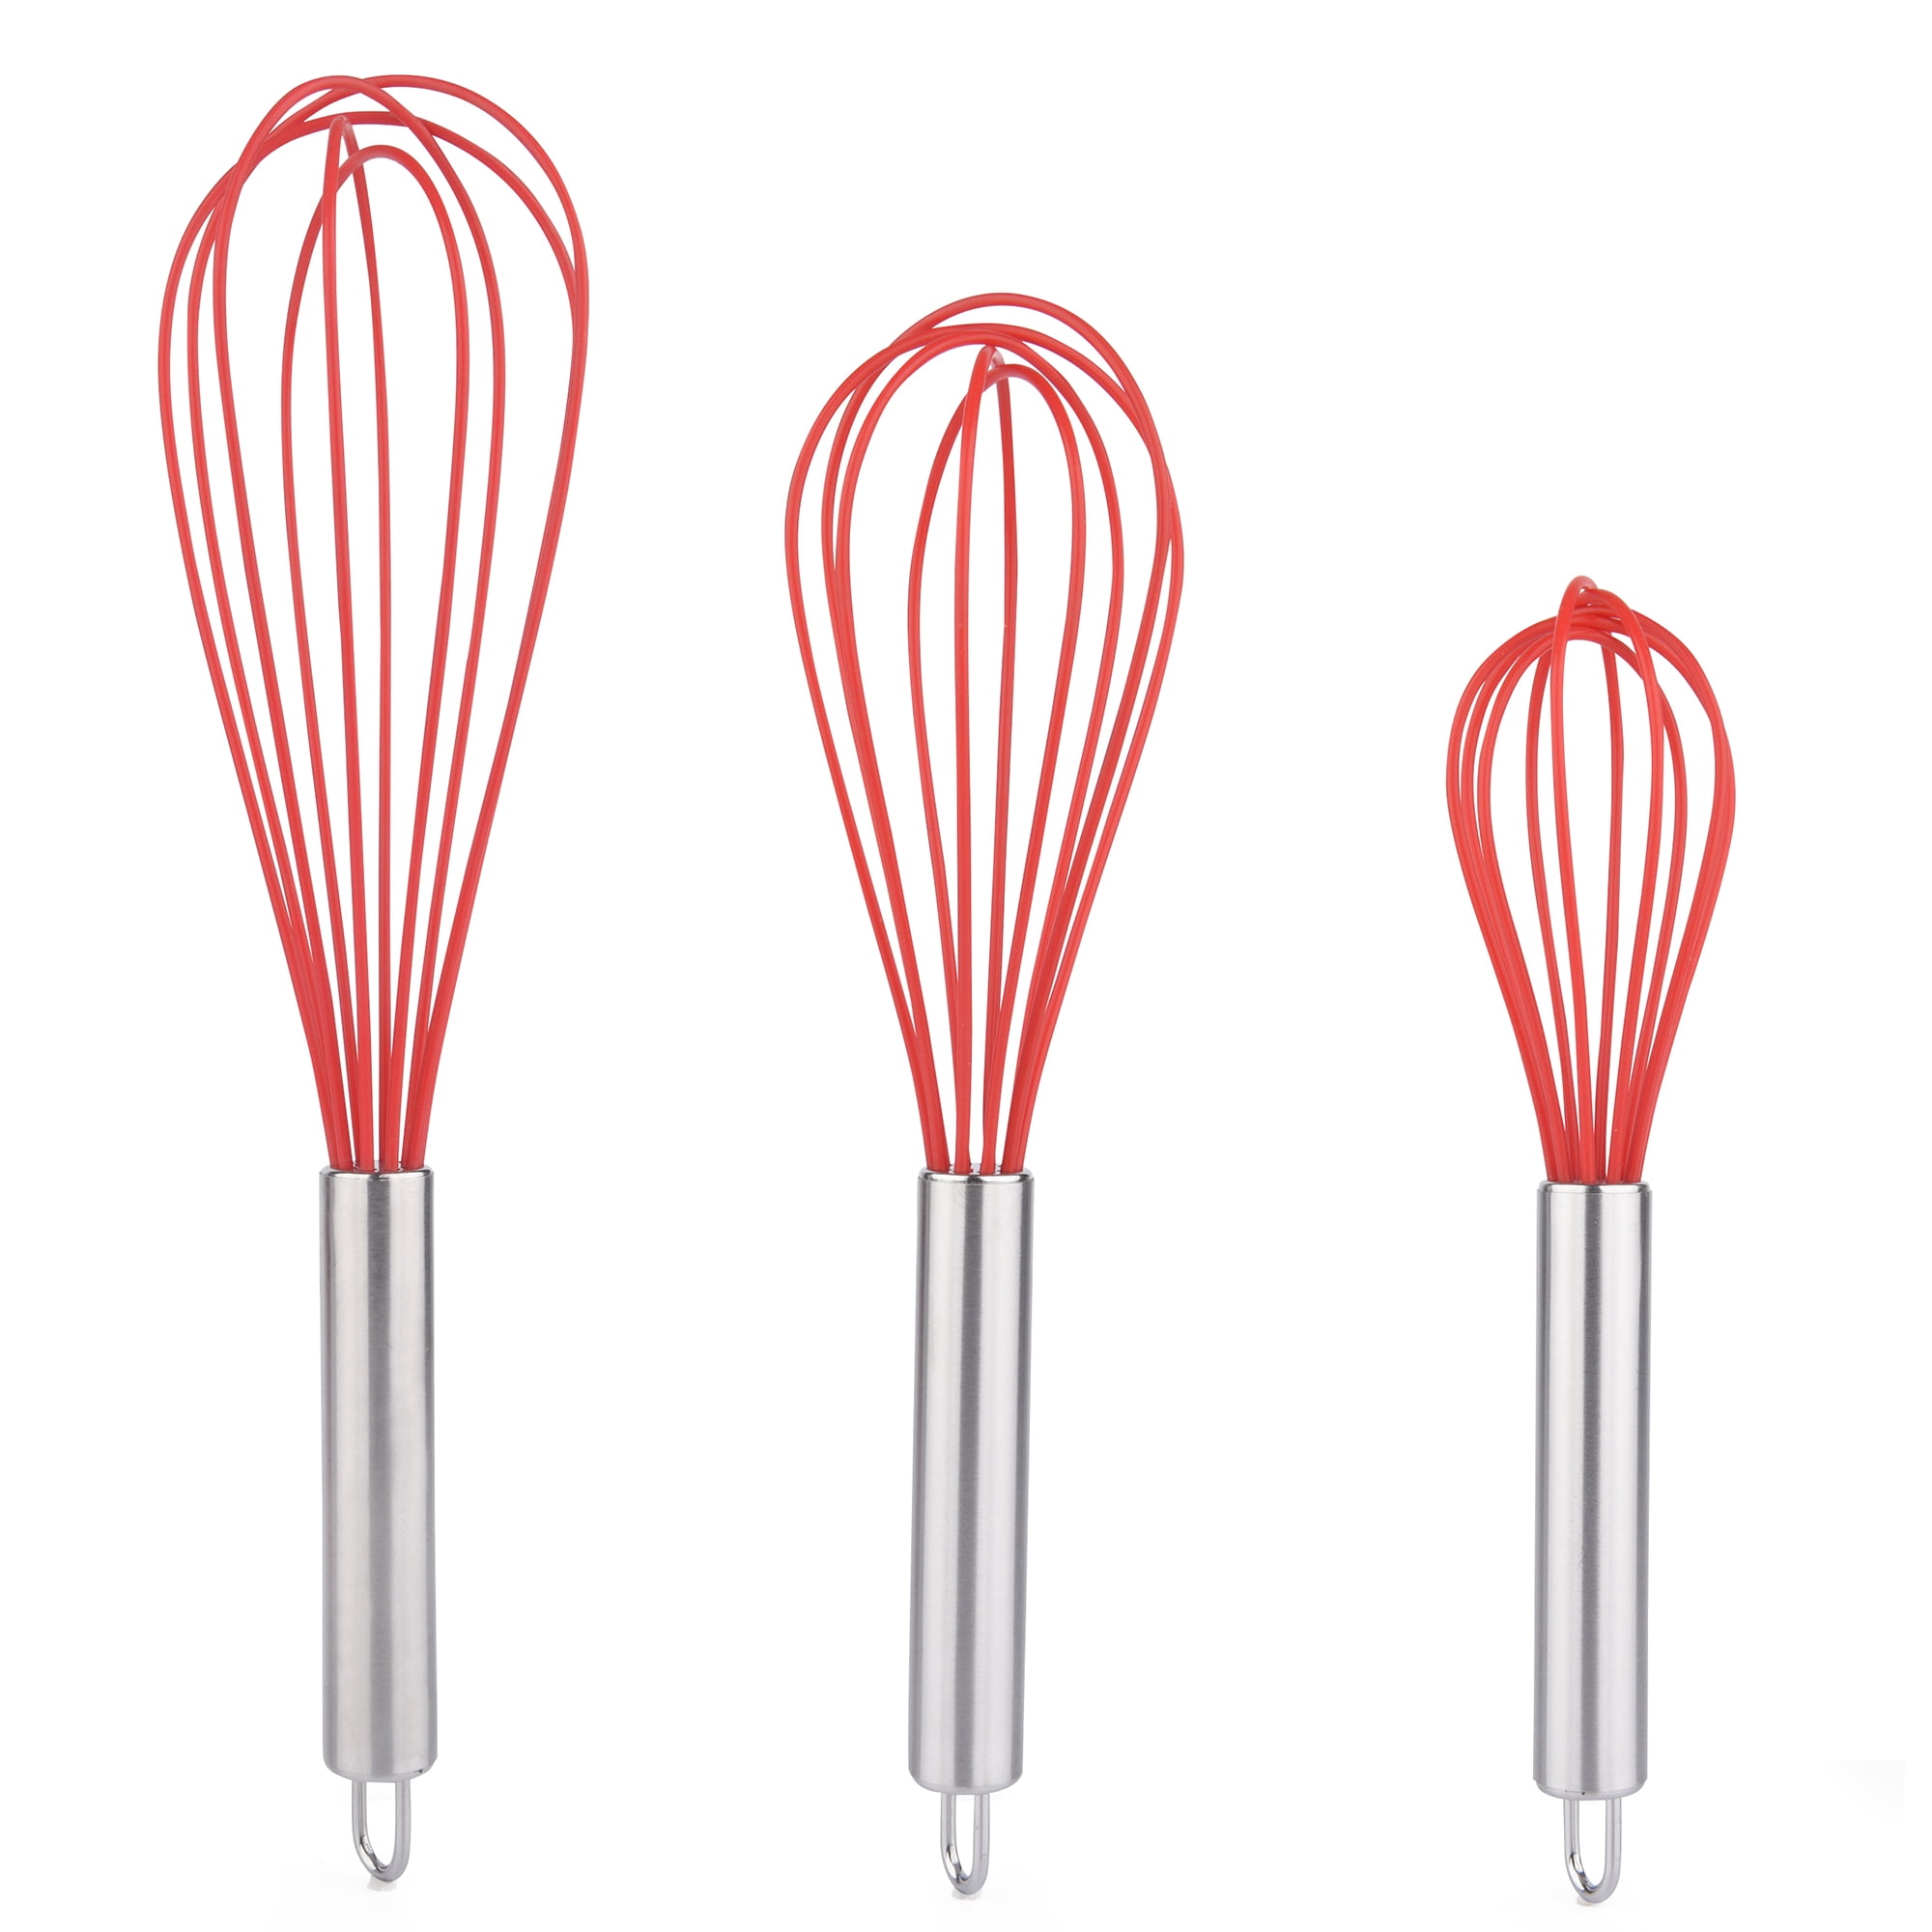 DRAGONN Red Silicone Whisks with Stainless Steel Handles Set of 3